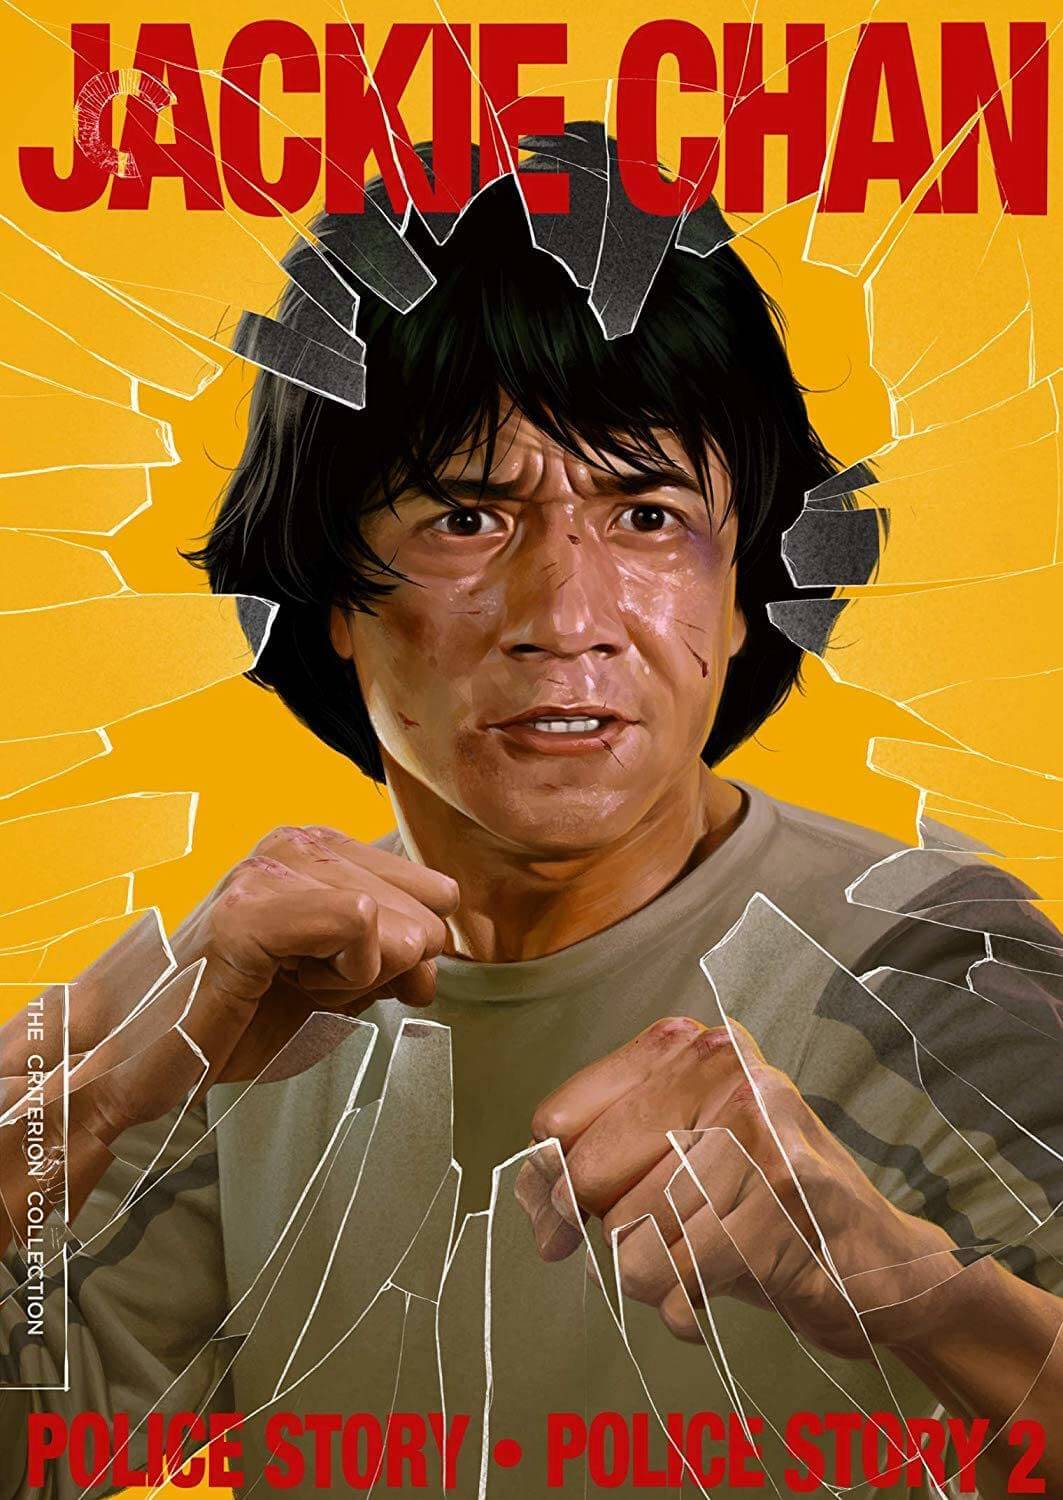 “Police Story” One and Two